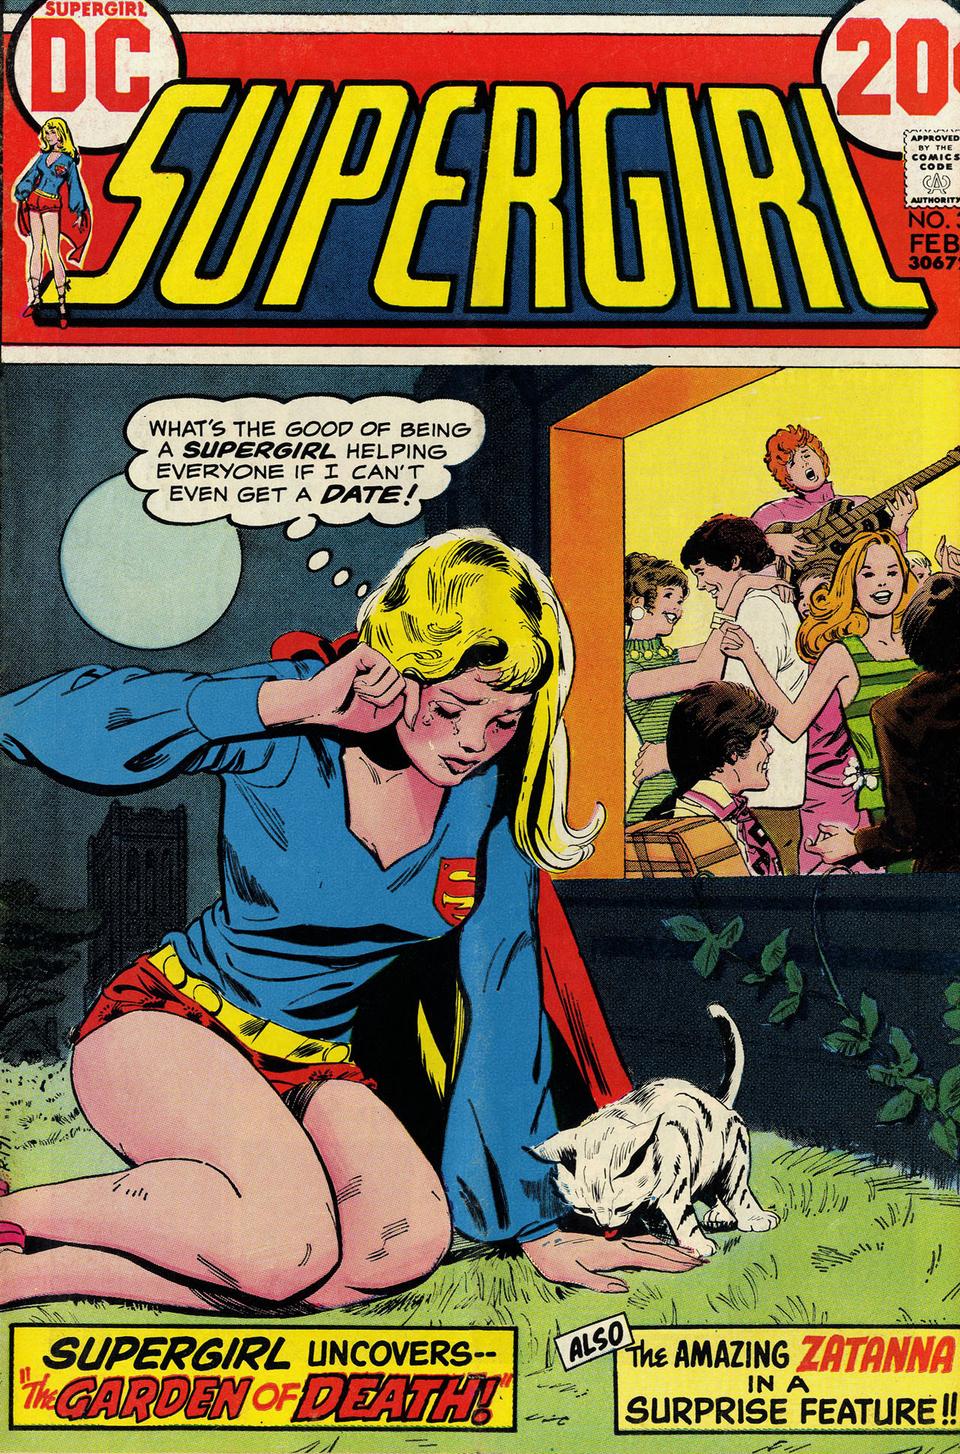 Supergirl crying over social ineptitude